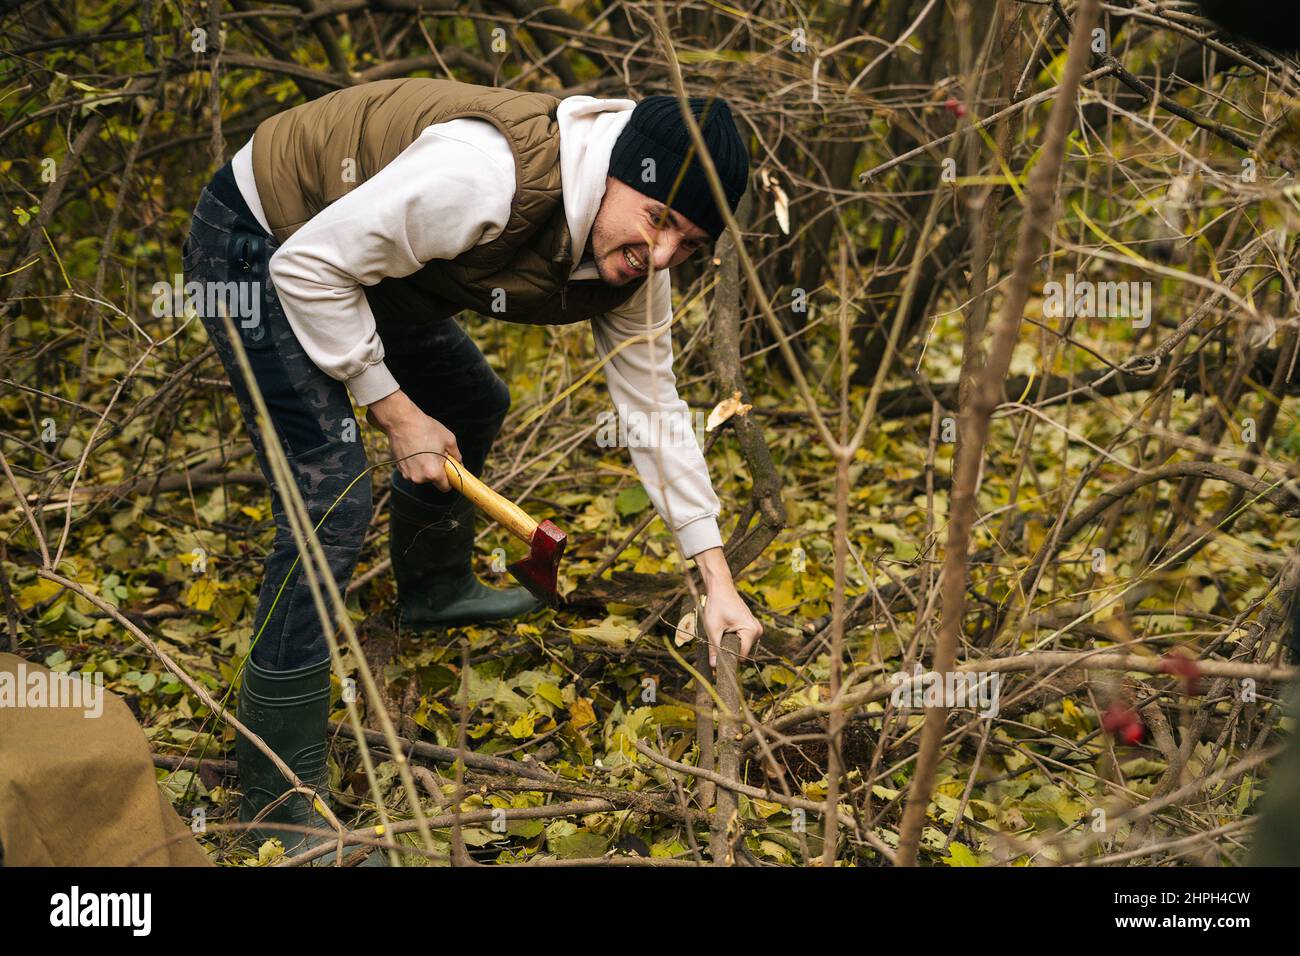 Tired tourist male wearing warm clothes chopping firewood with axe in forest on overcast cold day. Stock Photo